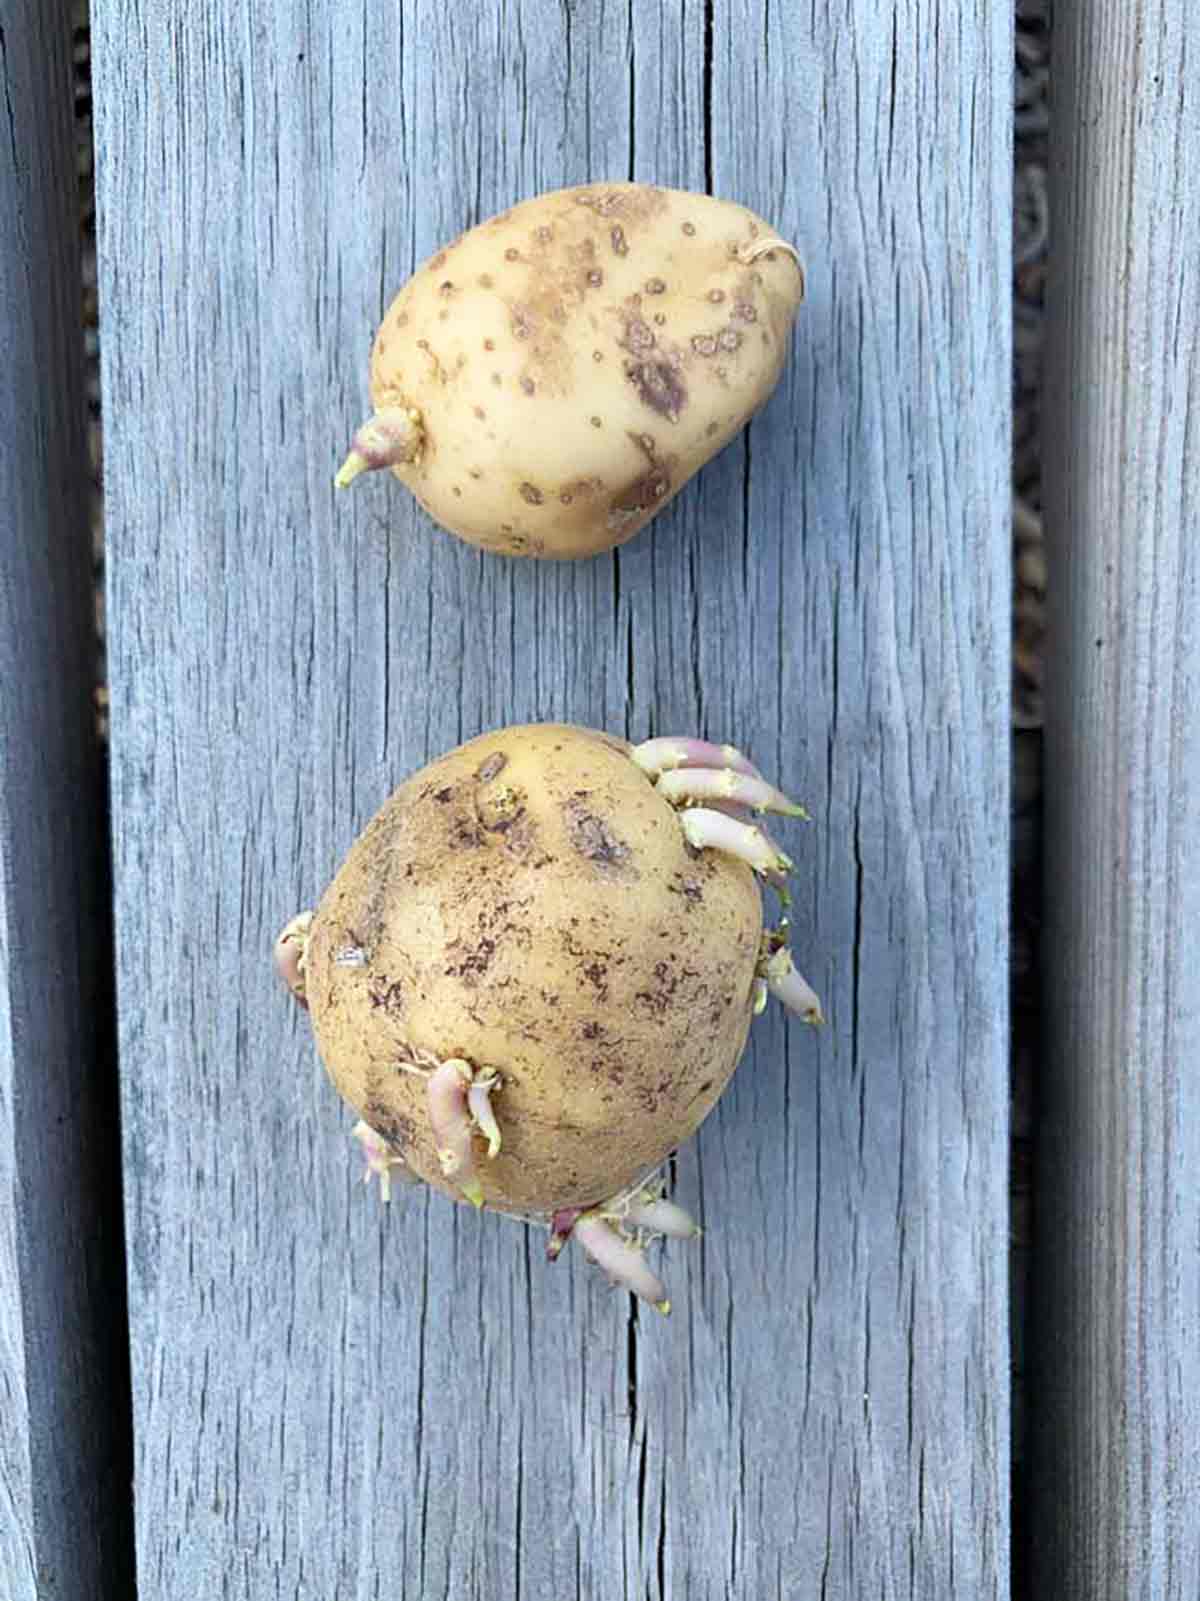 Sprouted Potatoes